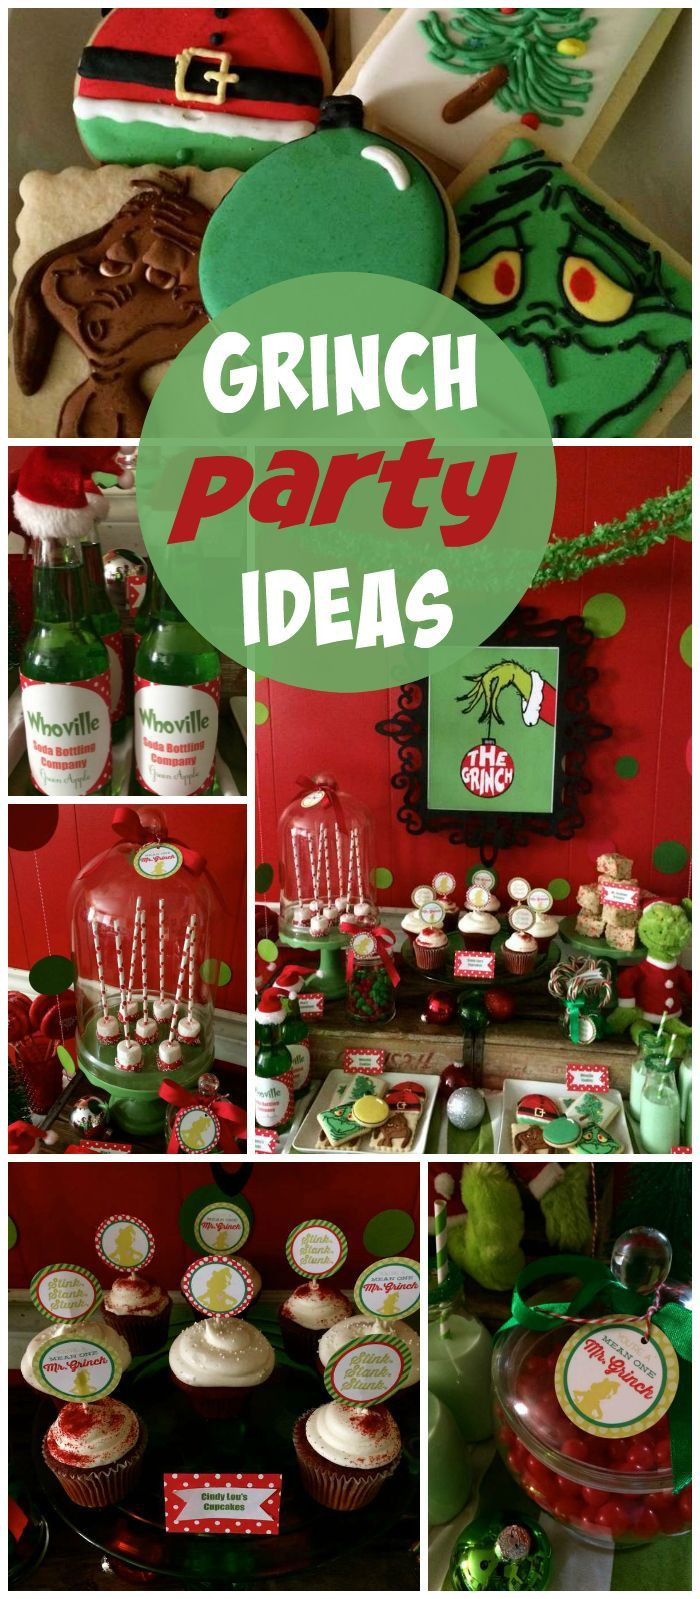 Pinterest Christmas Party Ideas
 Pin by Catch My Party on Christmas Ideas